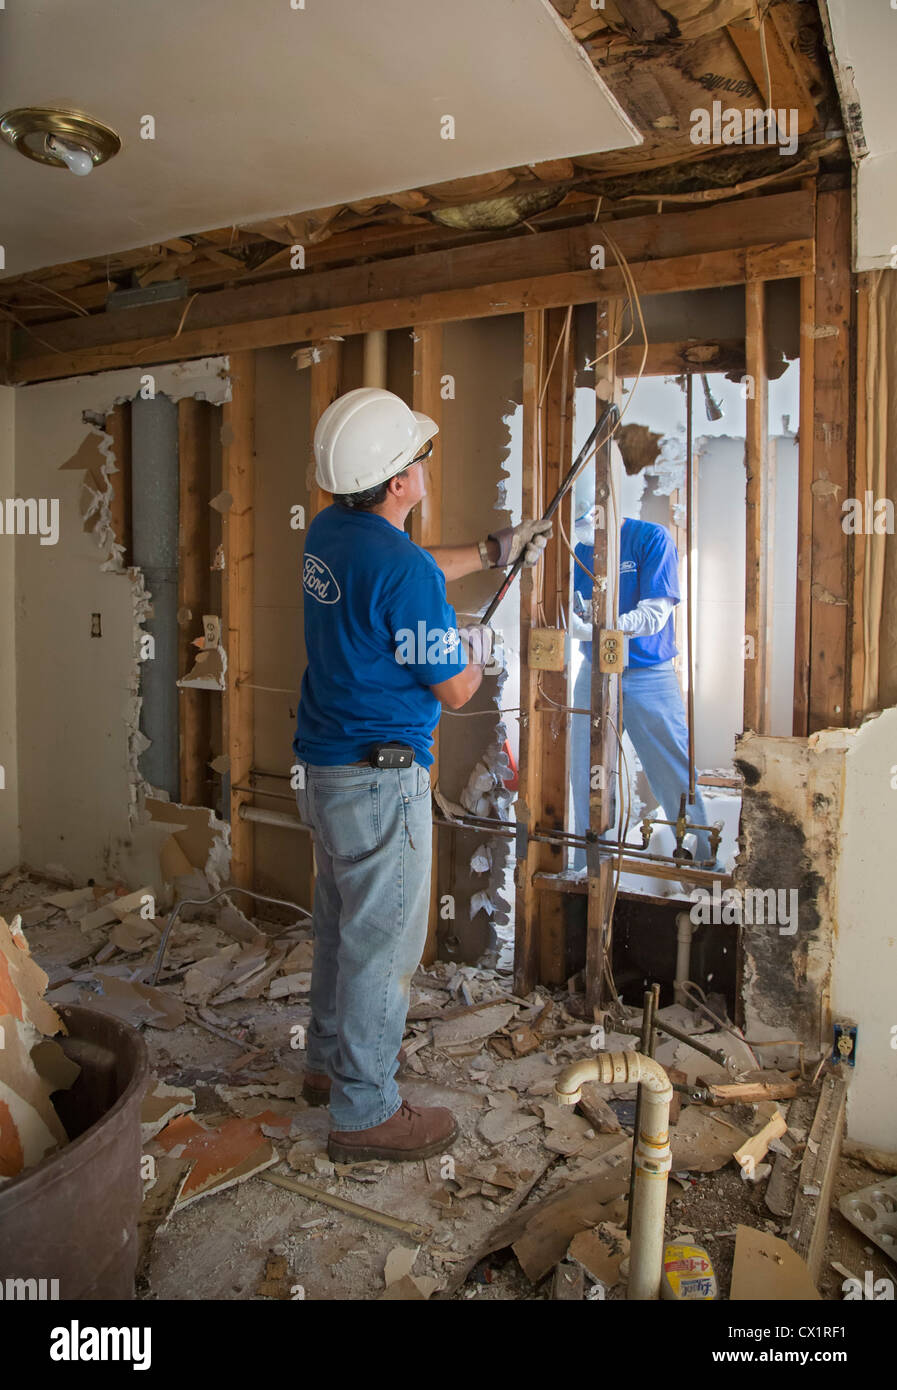 Ypsilanti, Michigan - Volunteers from Ford Motor Co. renovate a foreclosed house for Habitat for Humanity. Stock Photo